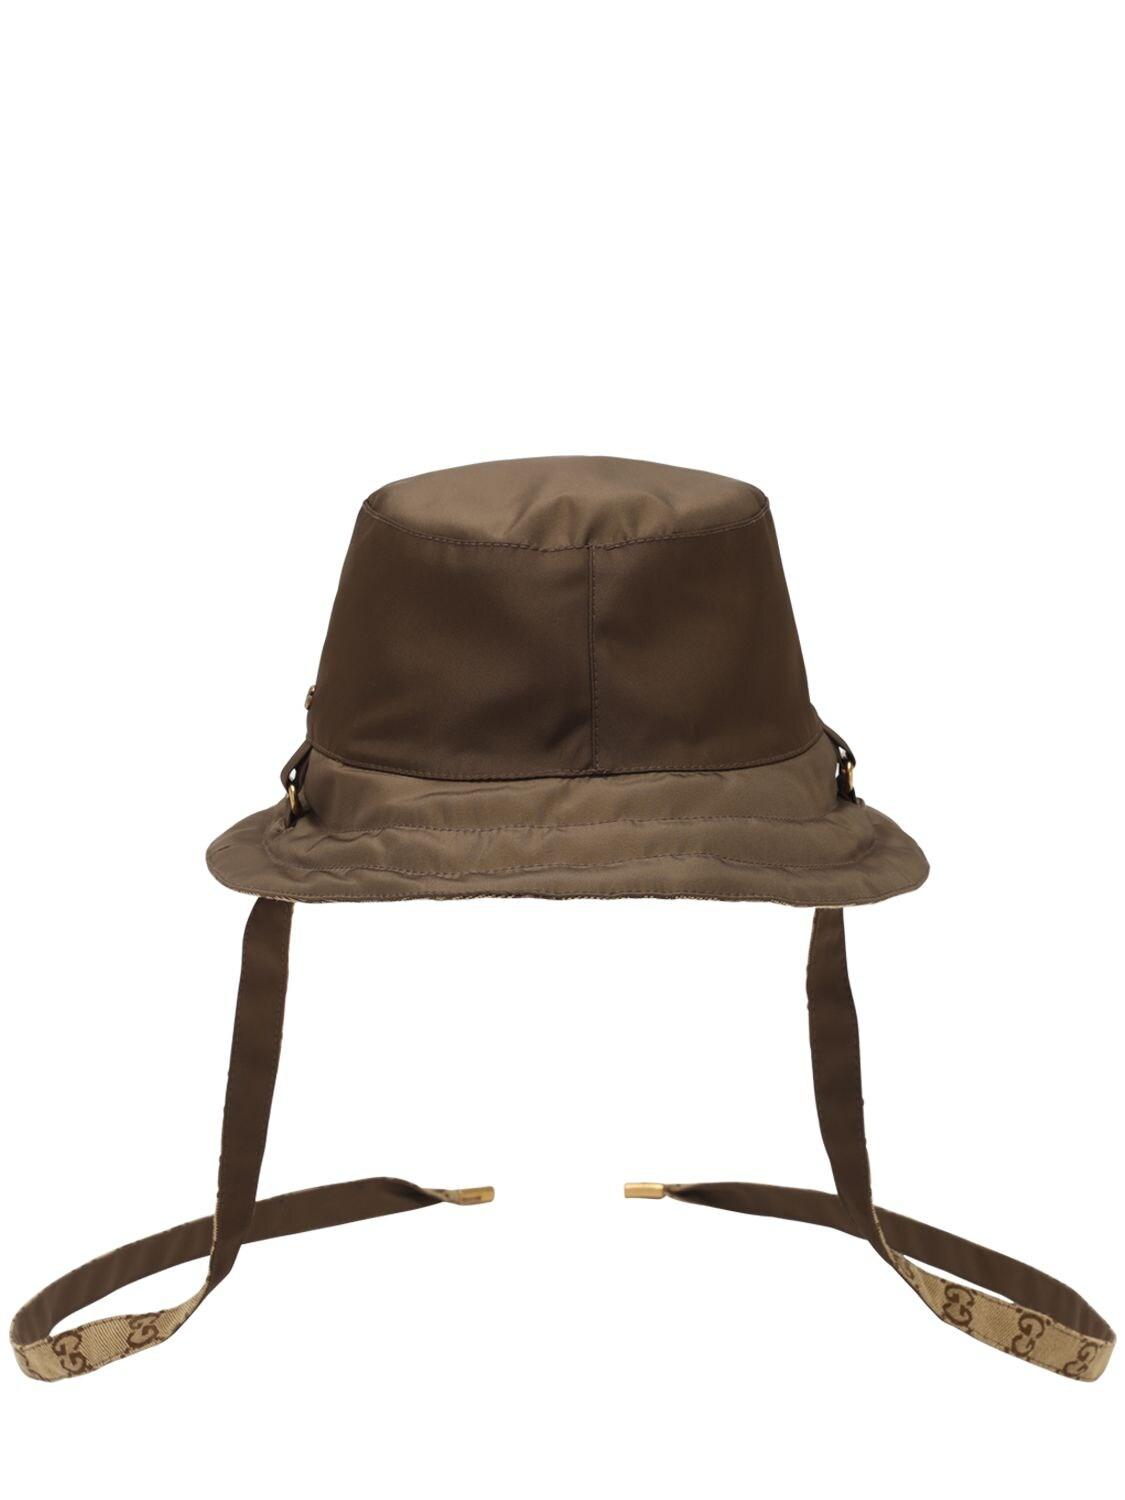 Gucci Synthetic Reversible gg Bucket Hat in Brown/Light Brown 